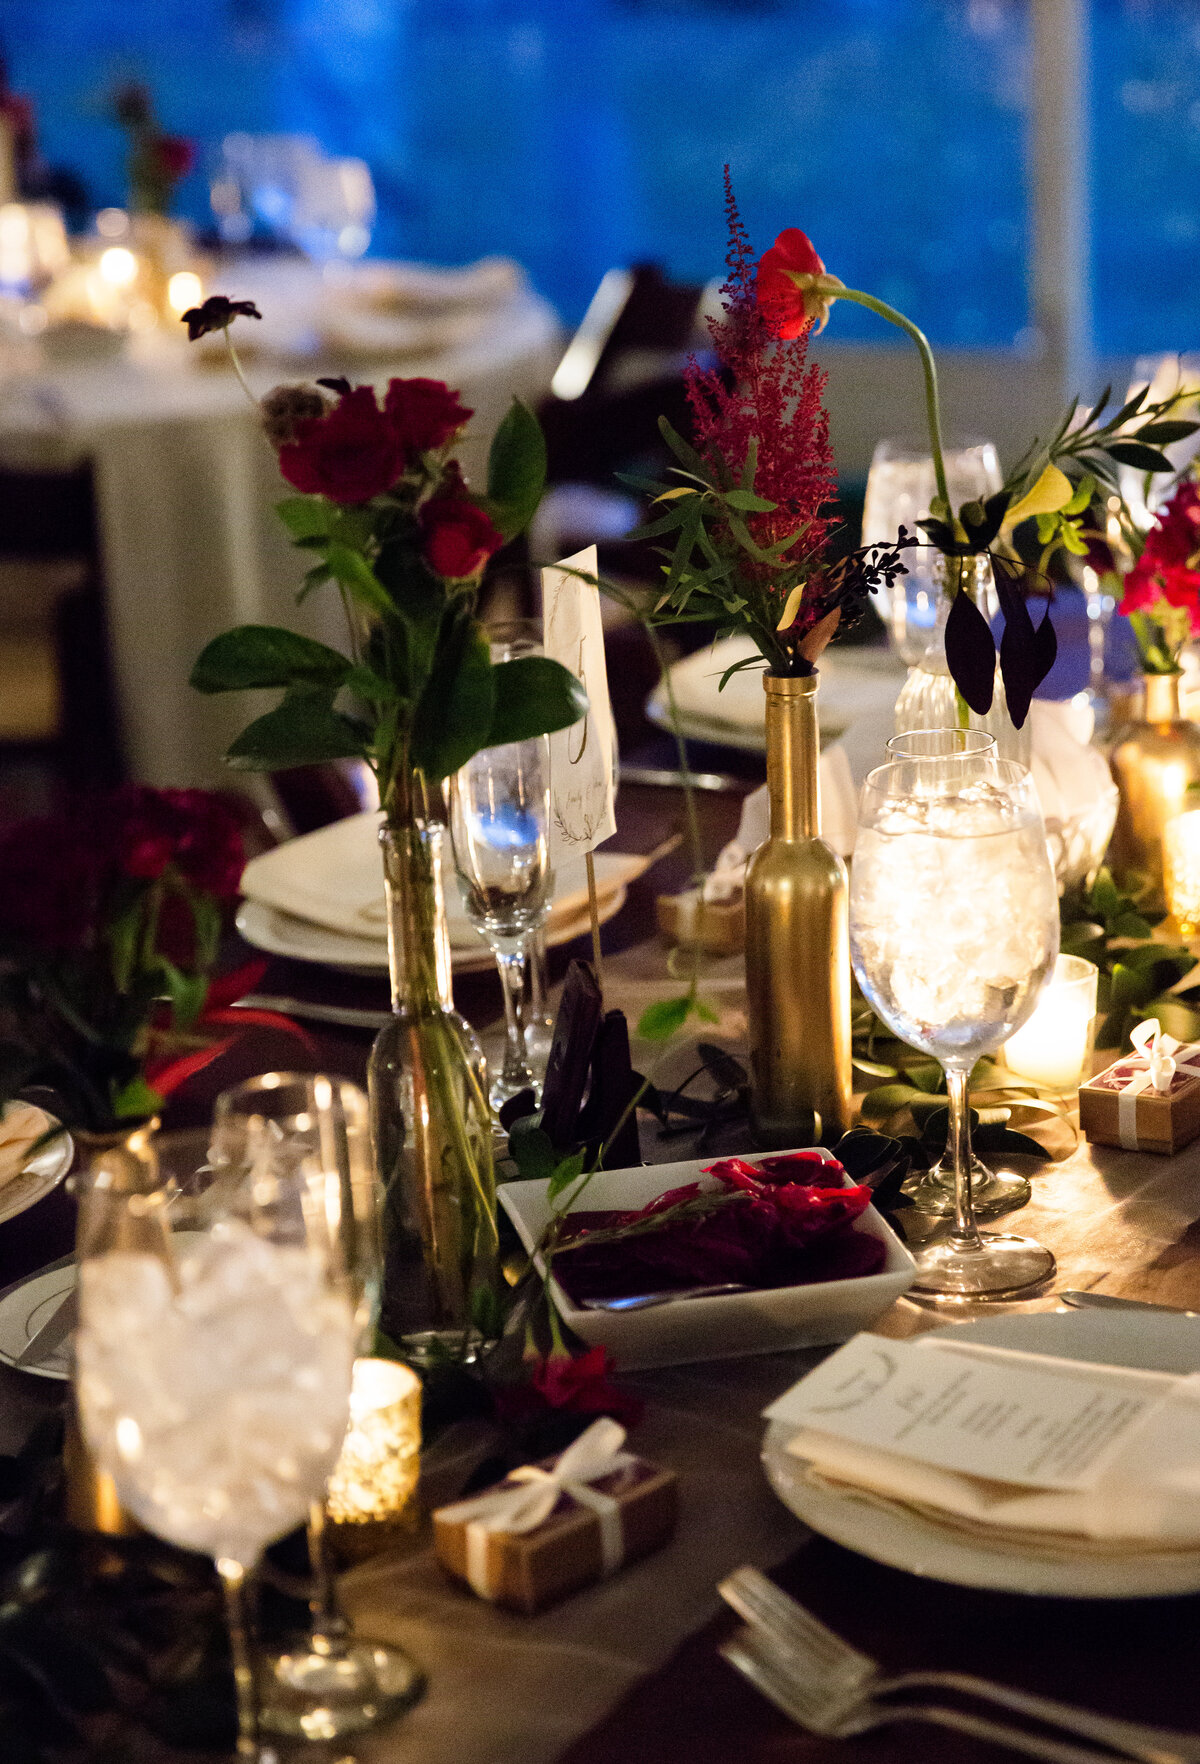 Antique gold and moody wedding reception tabletop